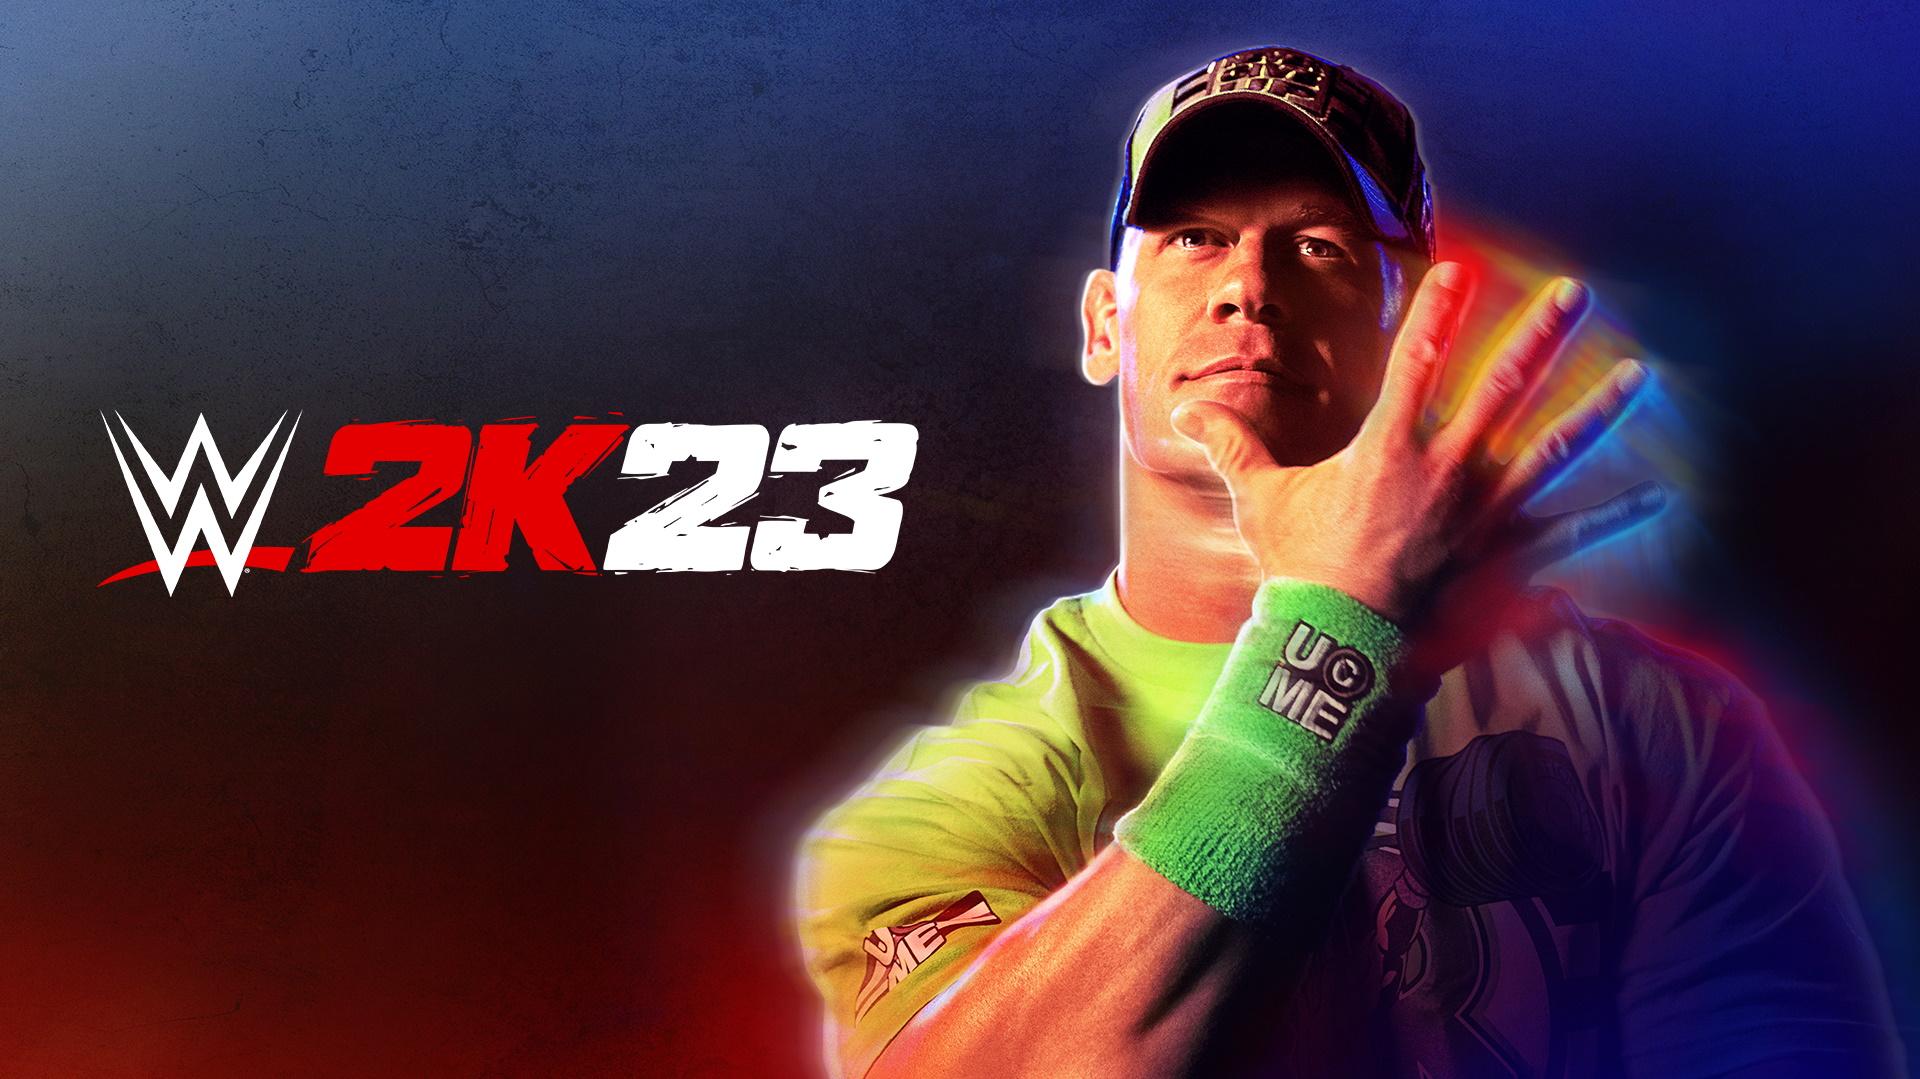 Video Official Wwe 2k23 Gameplay Trailer Released